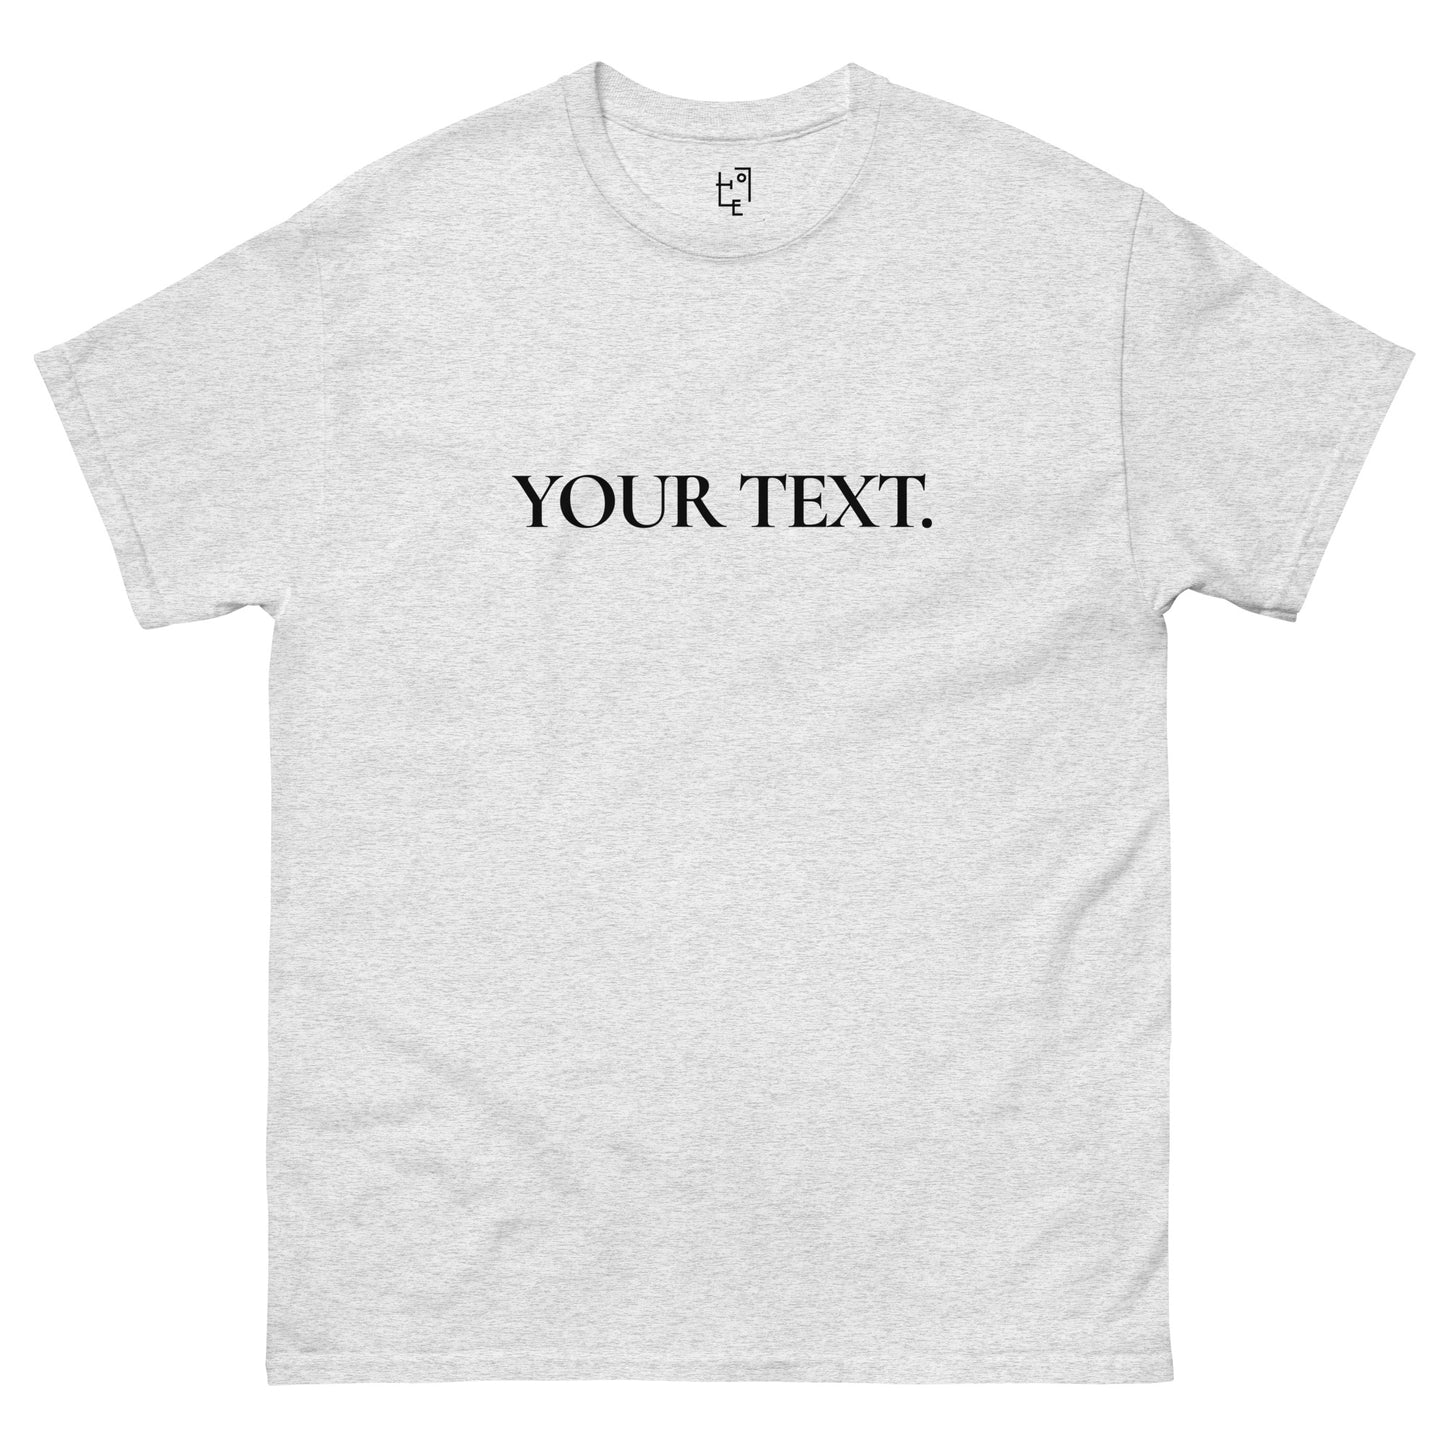 YOUR TEXT T